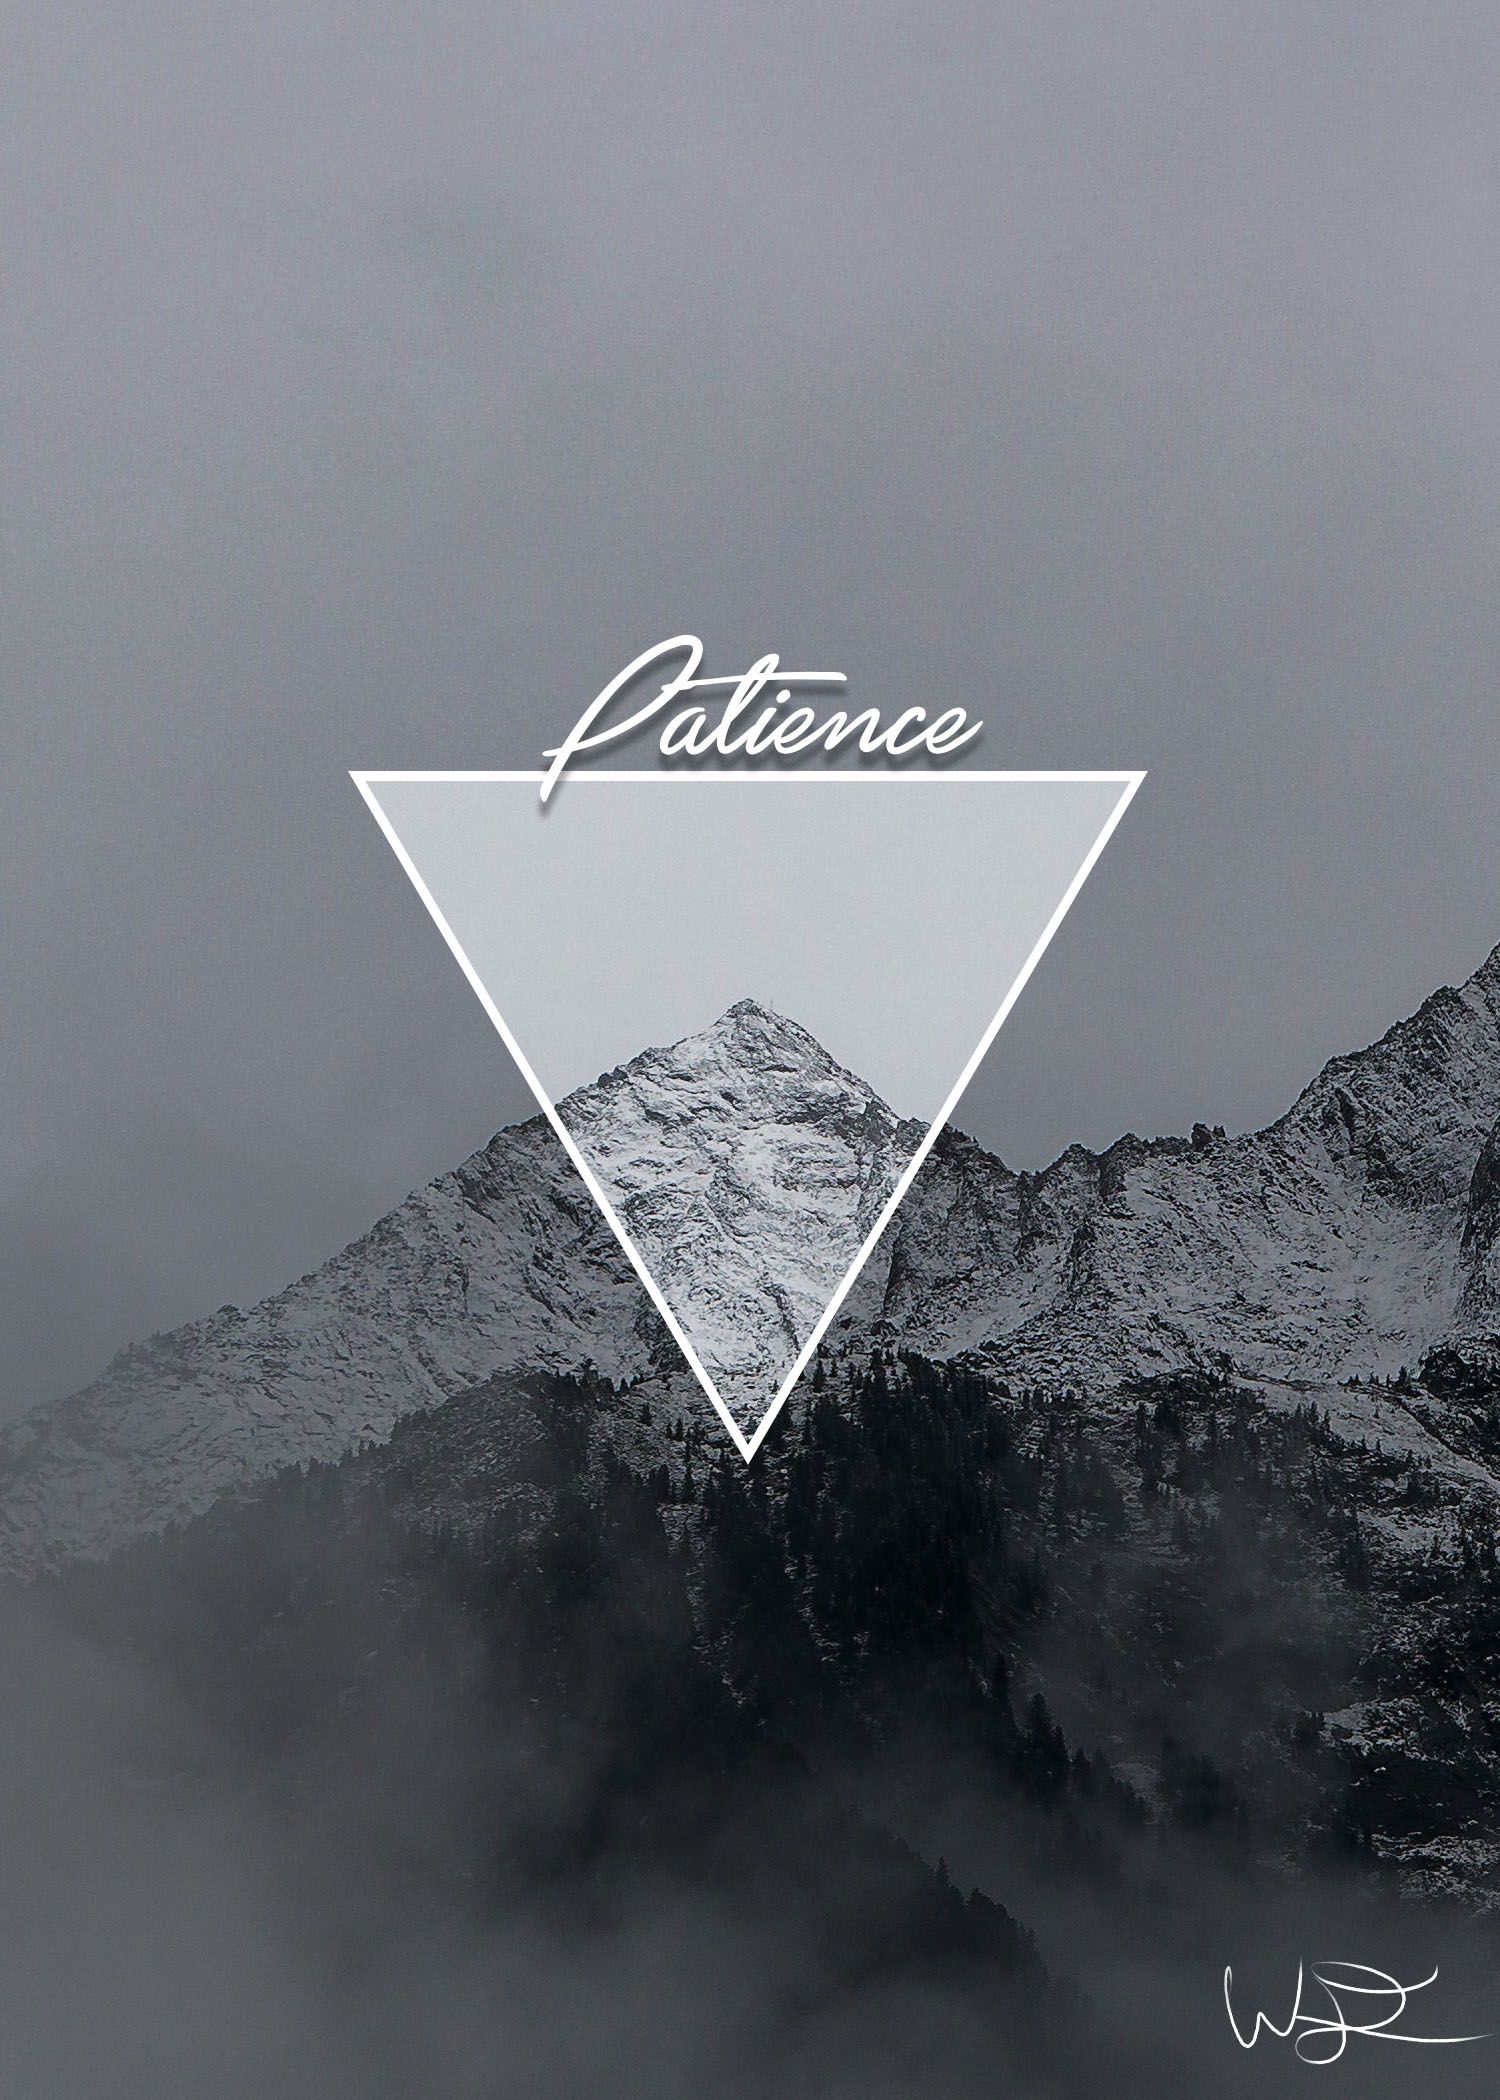 Patience Wallpaper For iPhone Or Android In